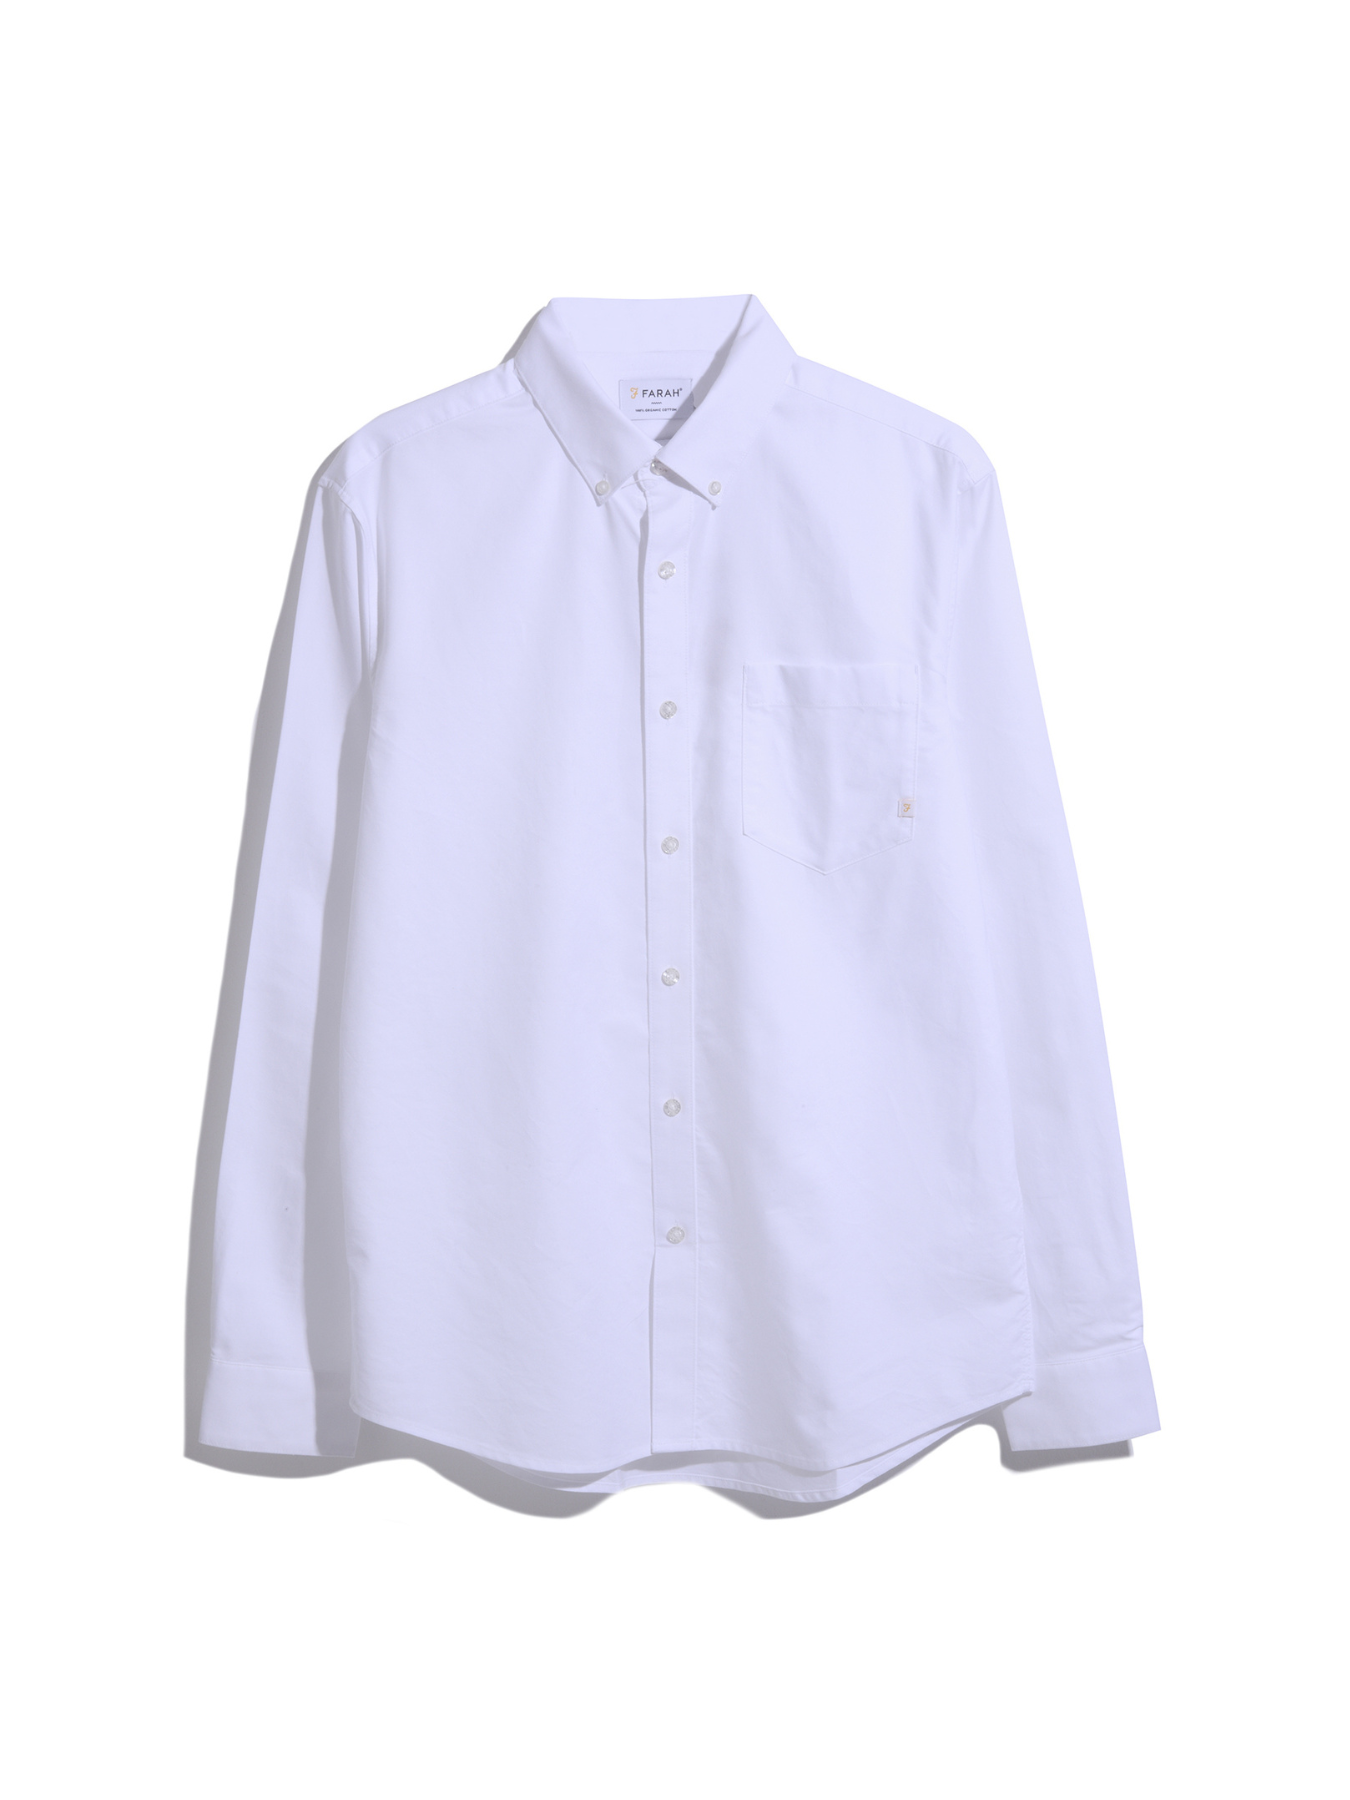 View Brewer Casual Fit Organic Cotton Long Sleeve Shirt In White information